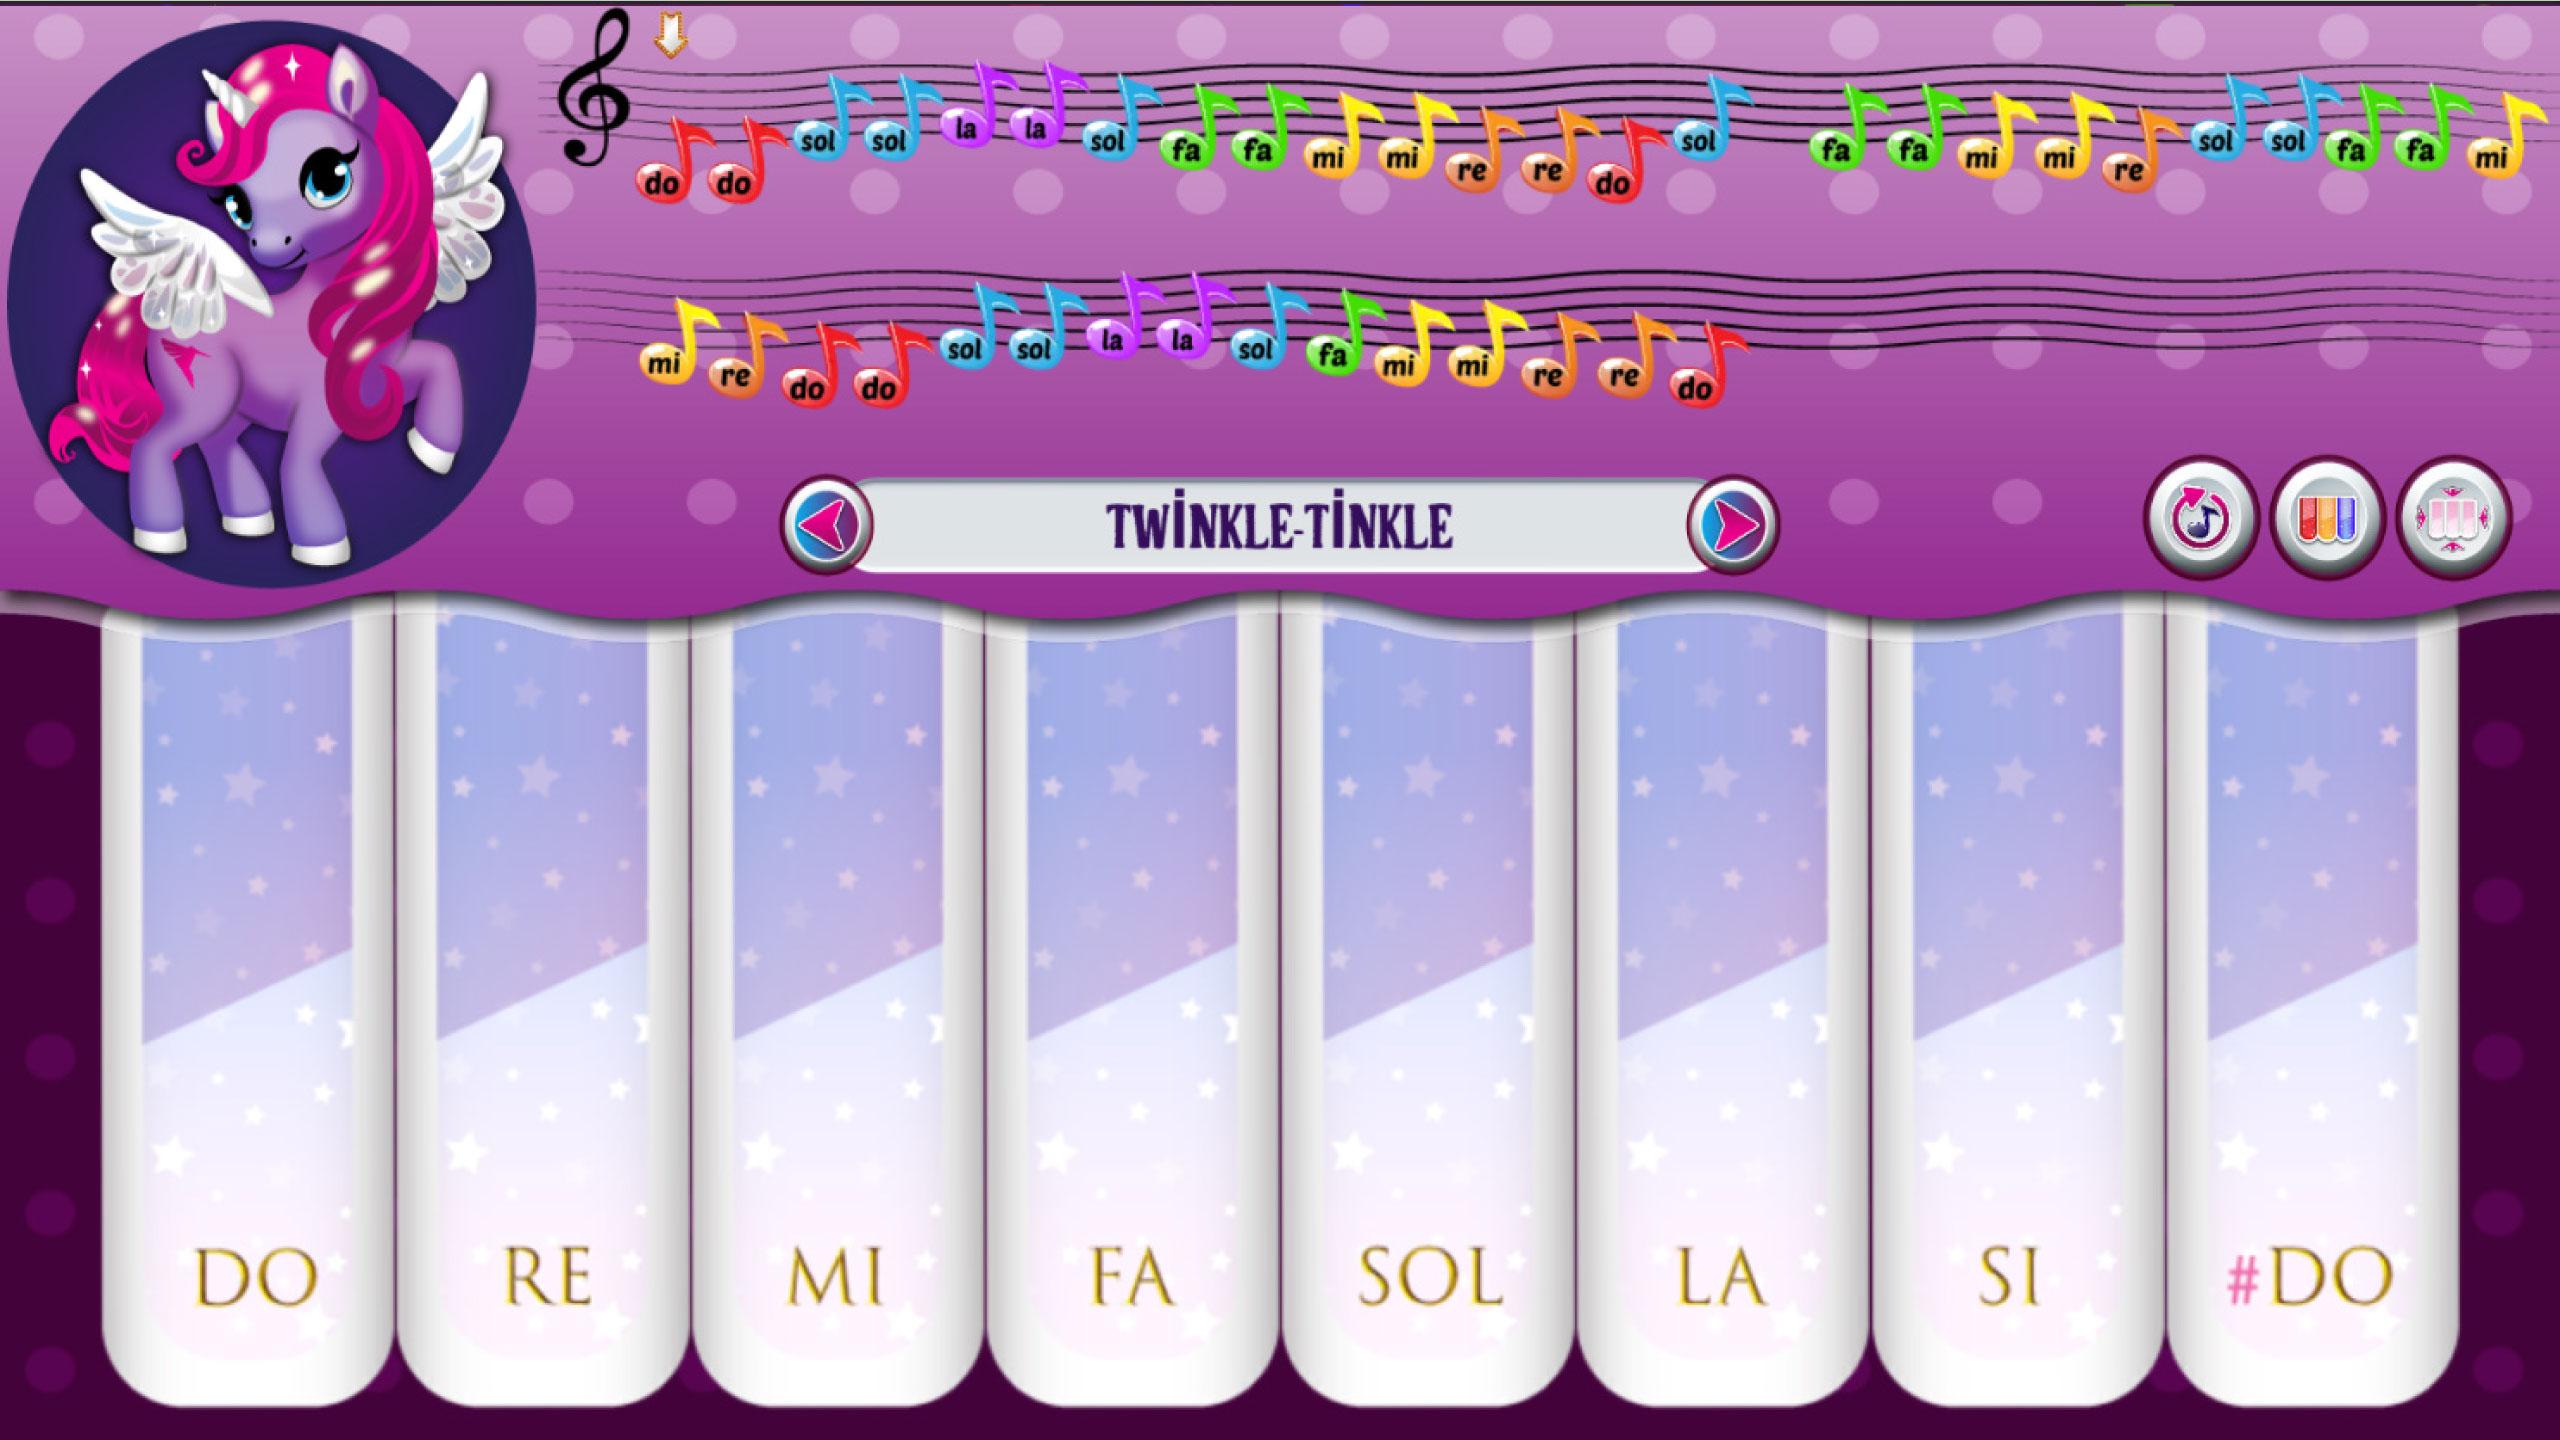 My Colorful Litle Pony Instrument - Piano 2.0 Screenshot 16